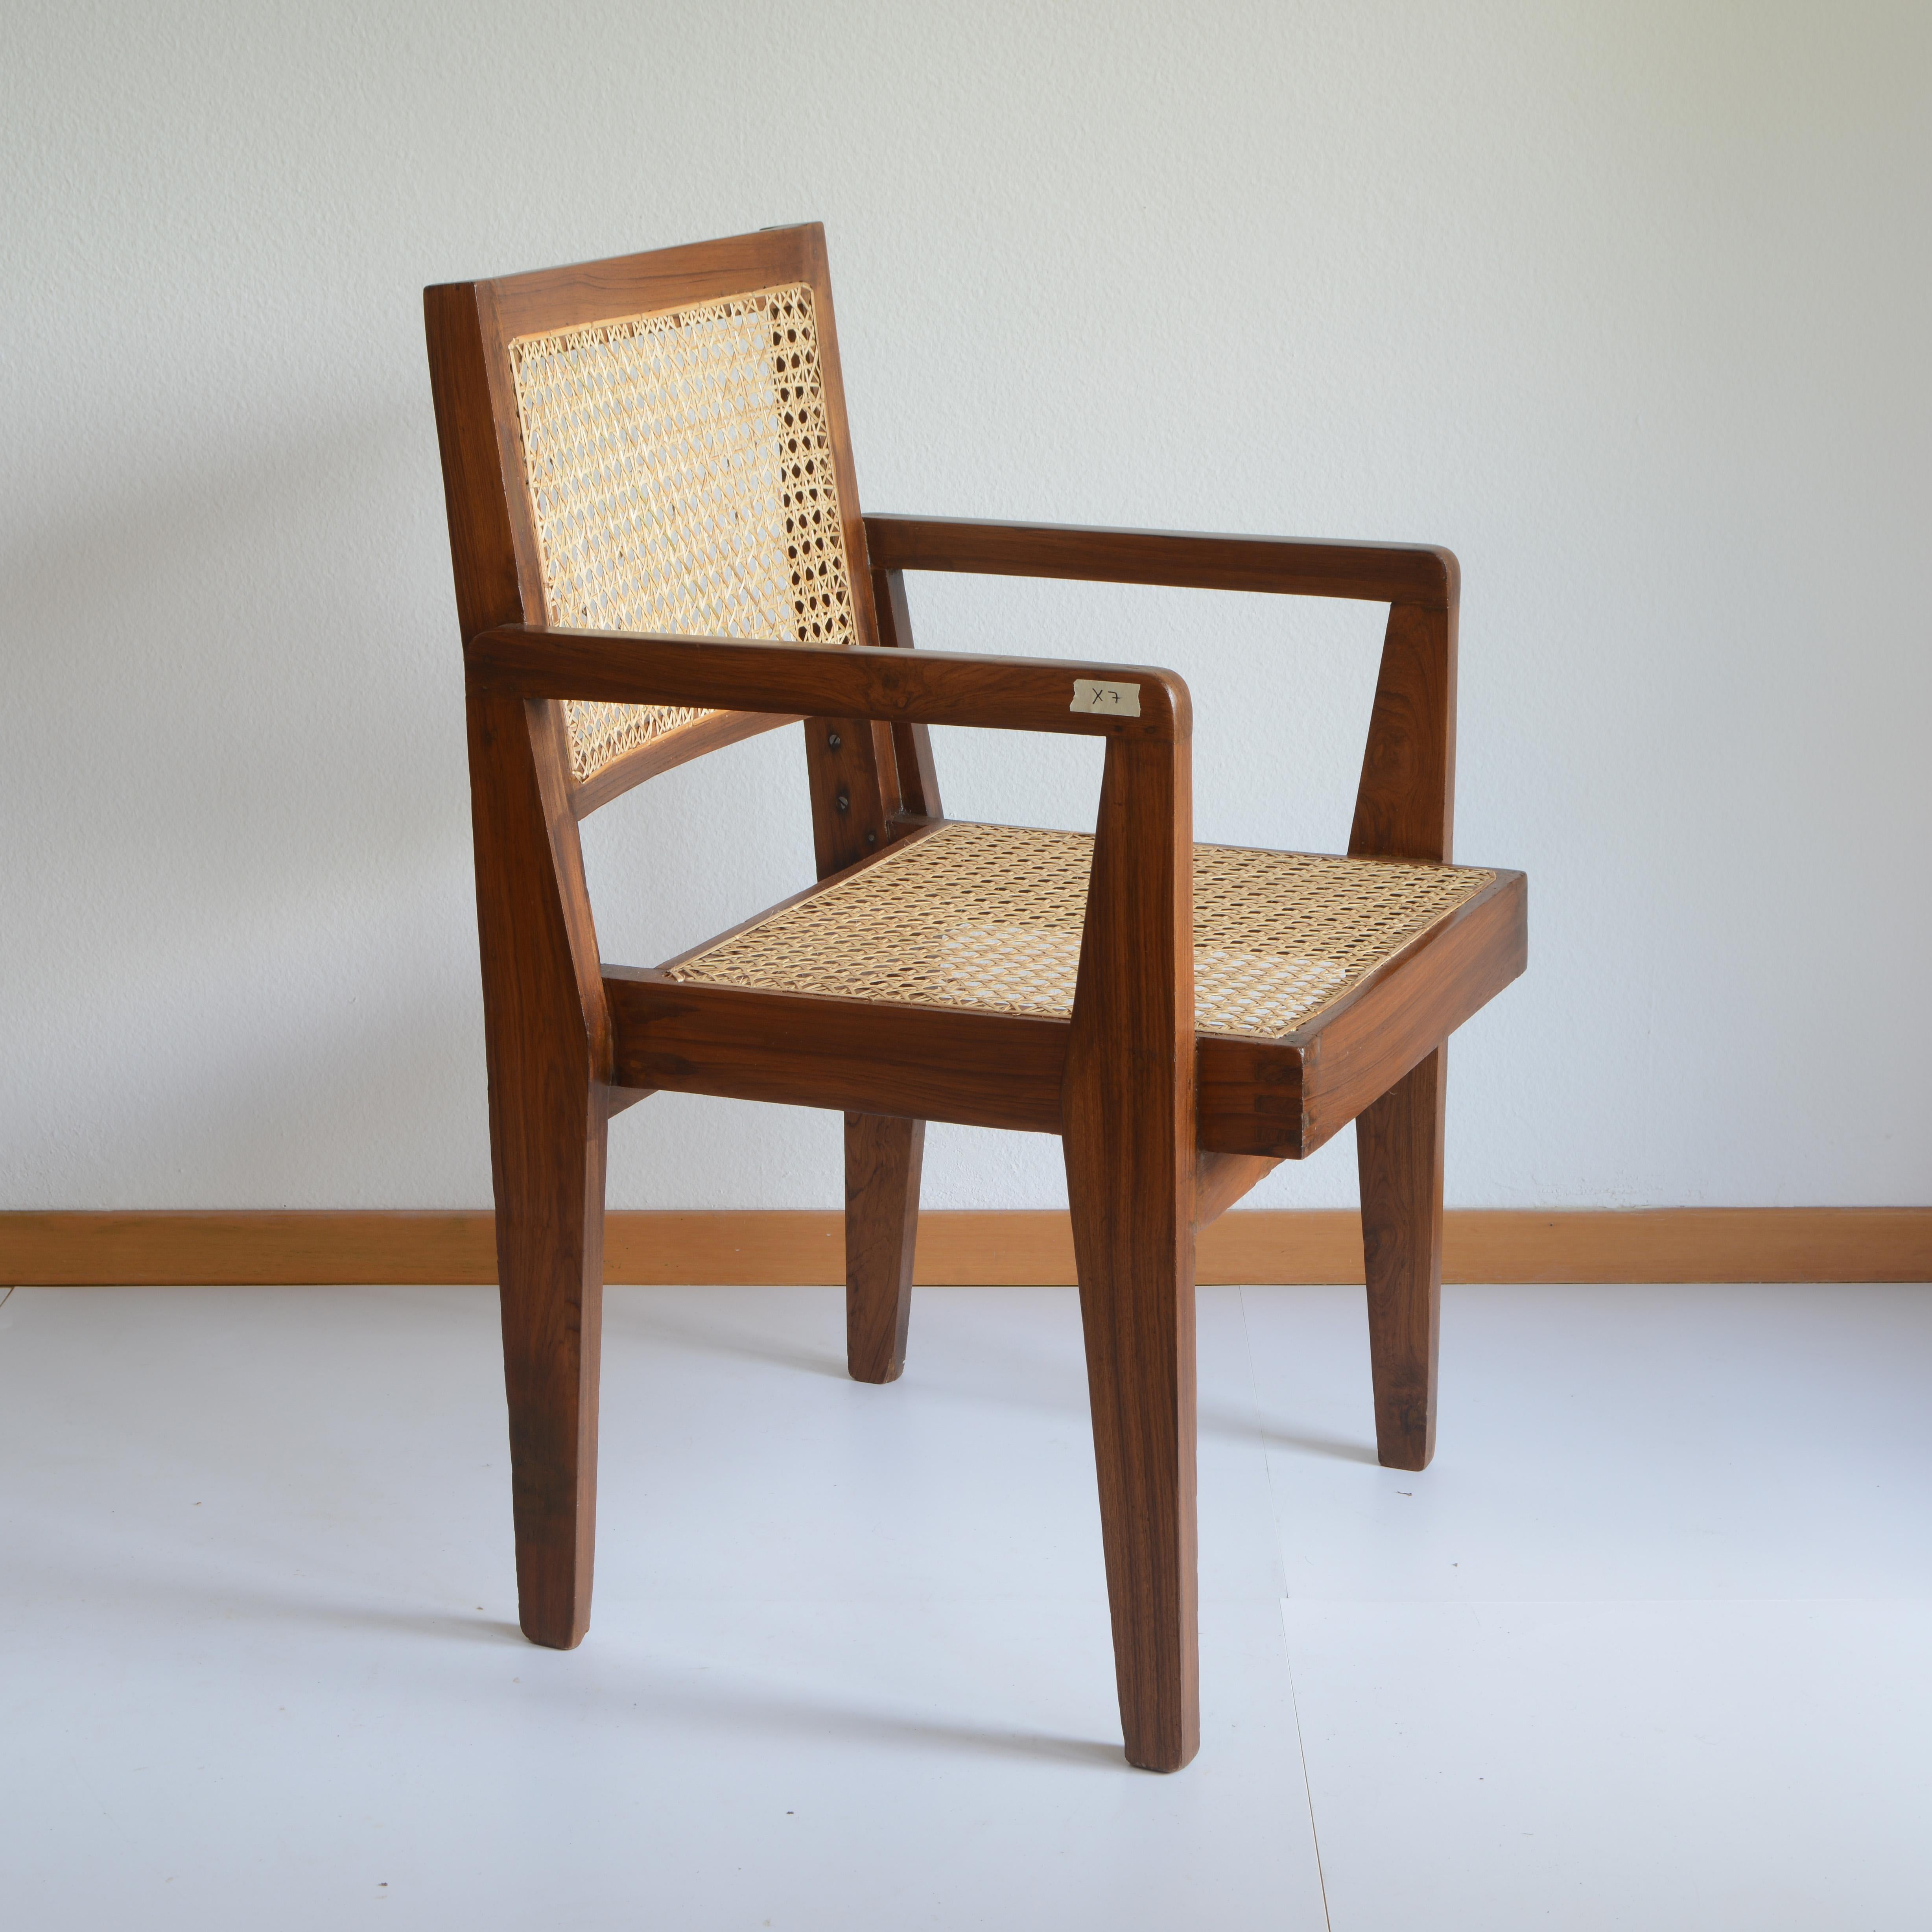 This chair is an iconic piece. It is raw in its simplicity and somehow has this strong, almost masculine attitude. There is also something deeply relaxing about this design but at the same time it’s very sharp and fierce. The back is very straight,